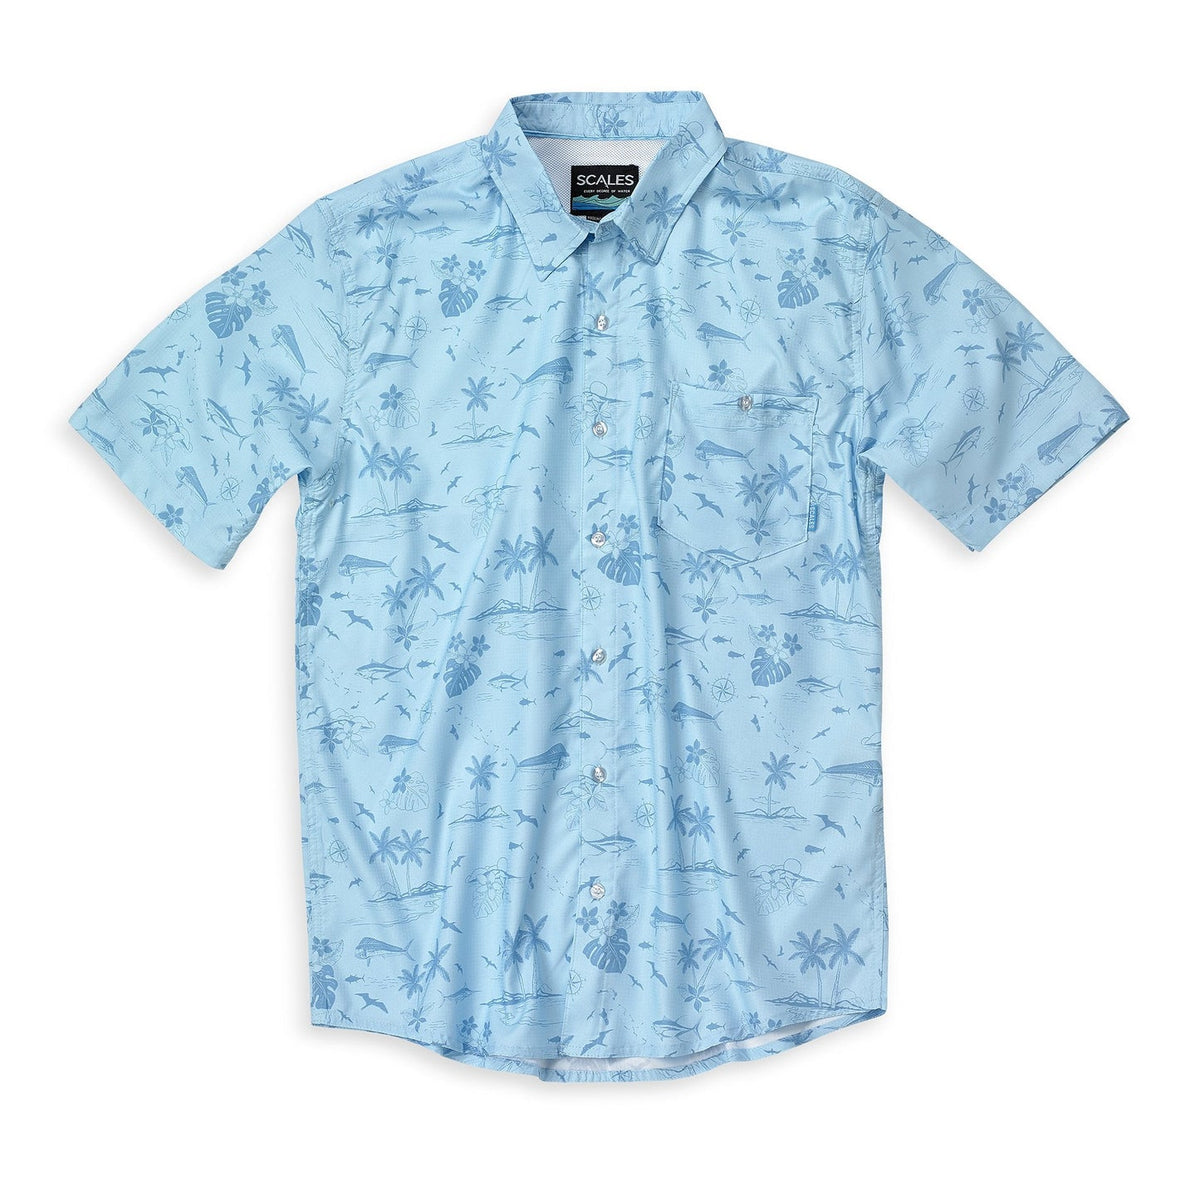 SCALES Never A Tourist Performance Button Down Shirt